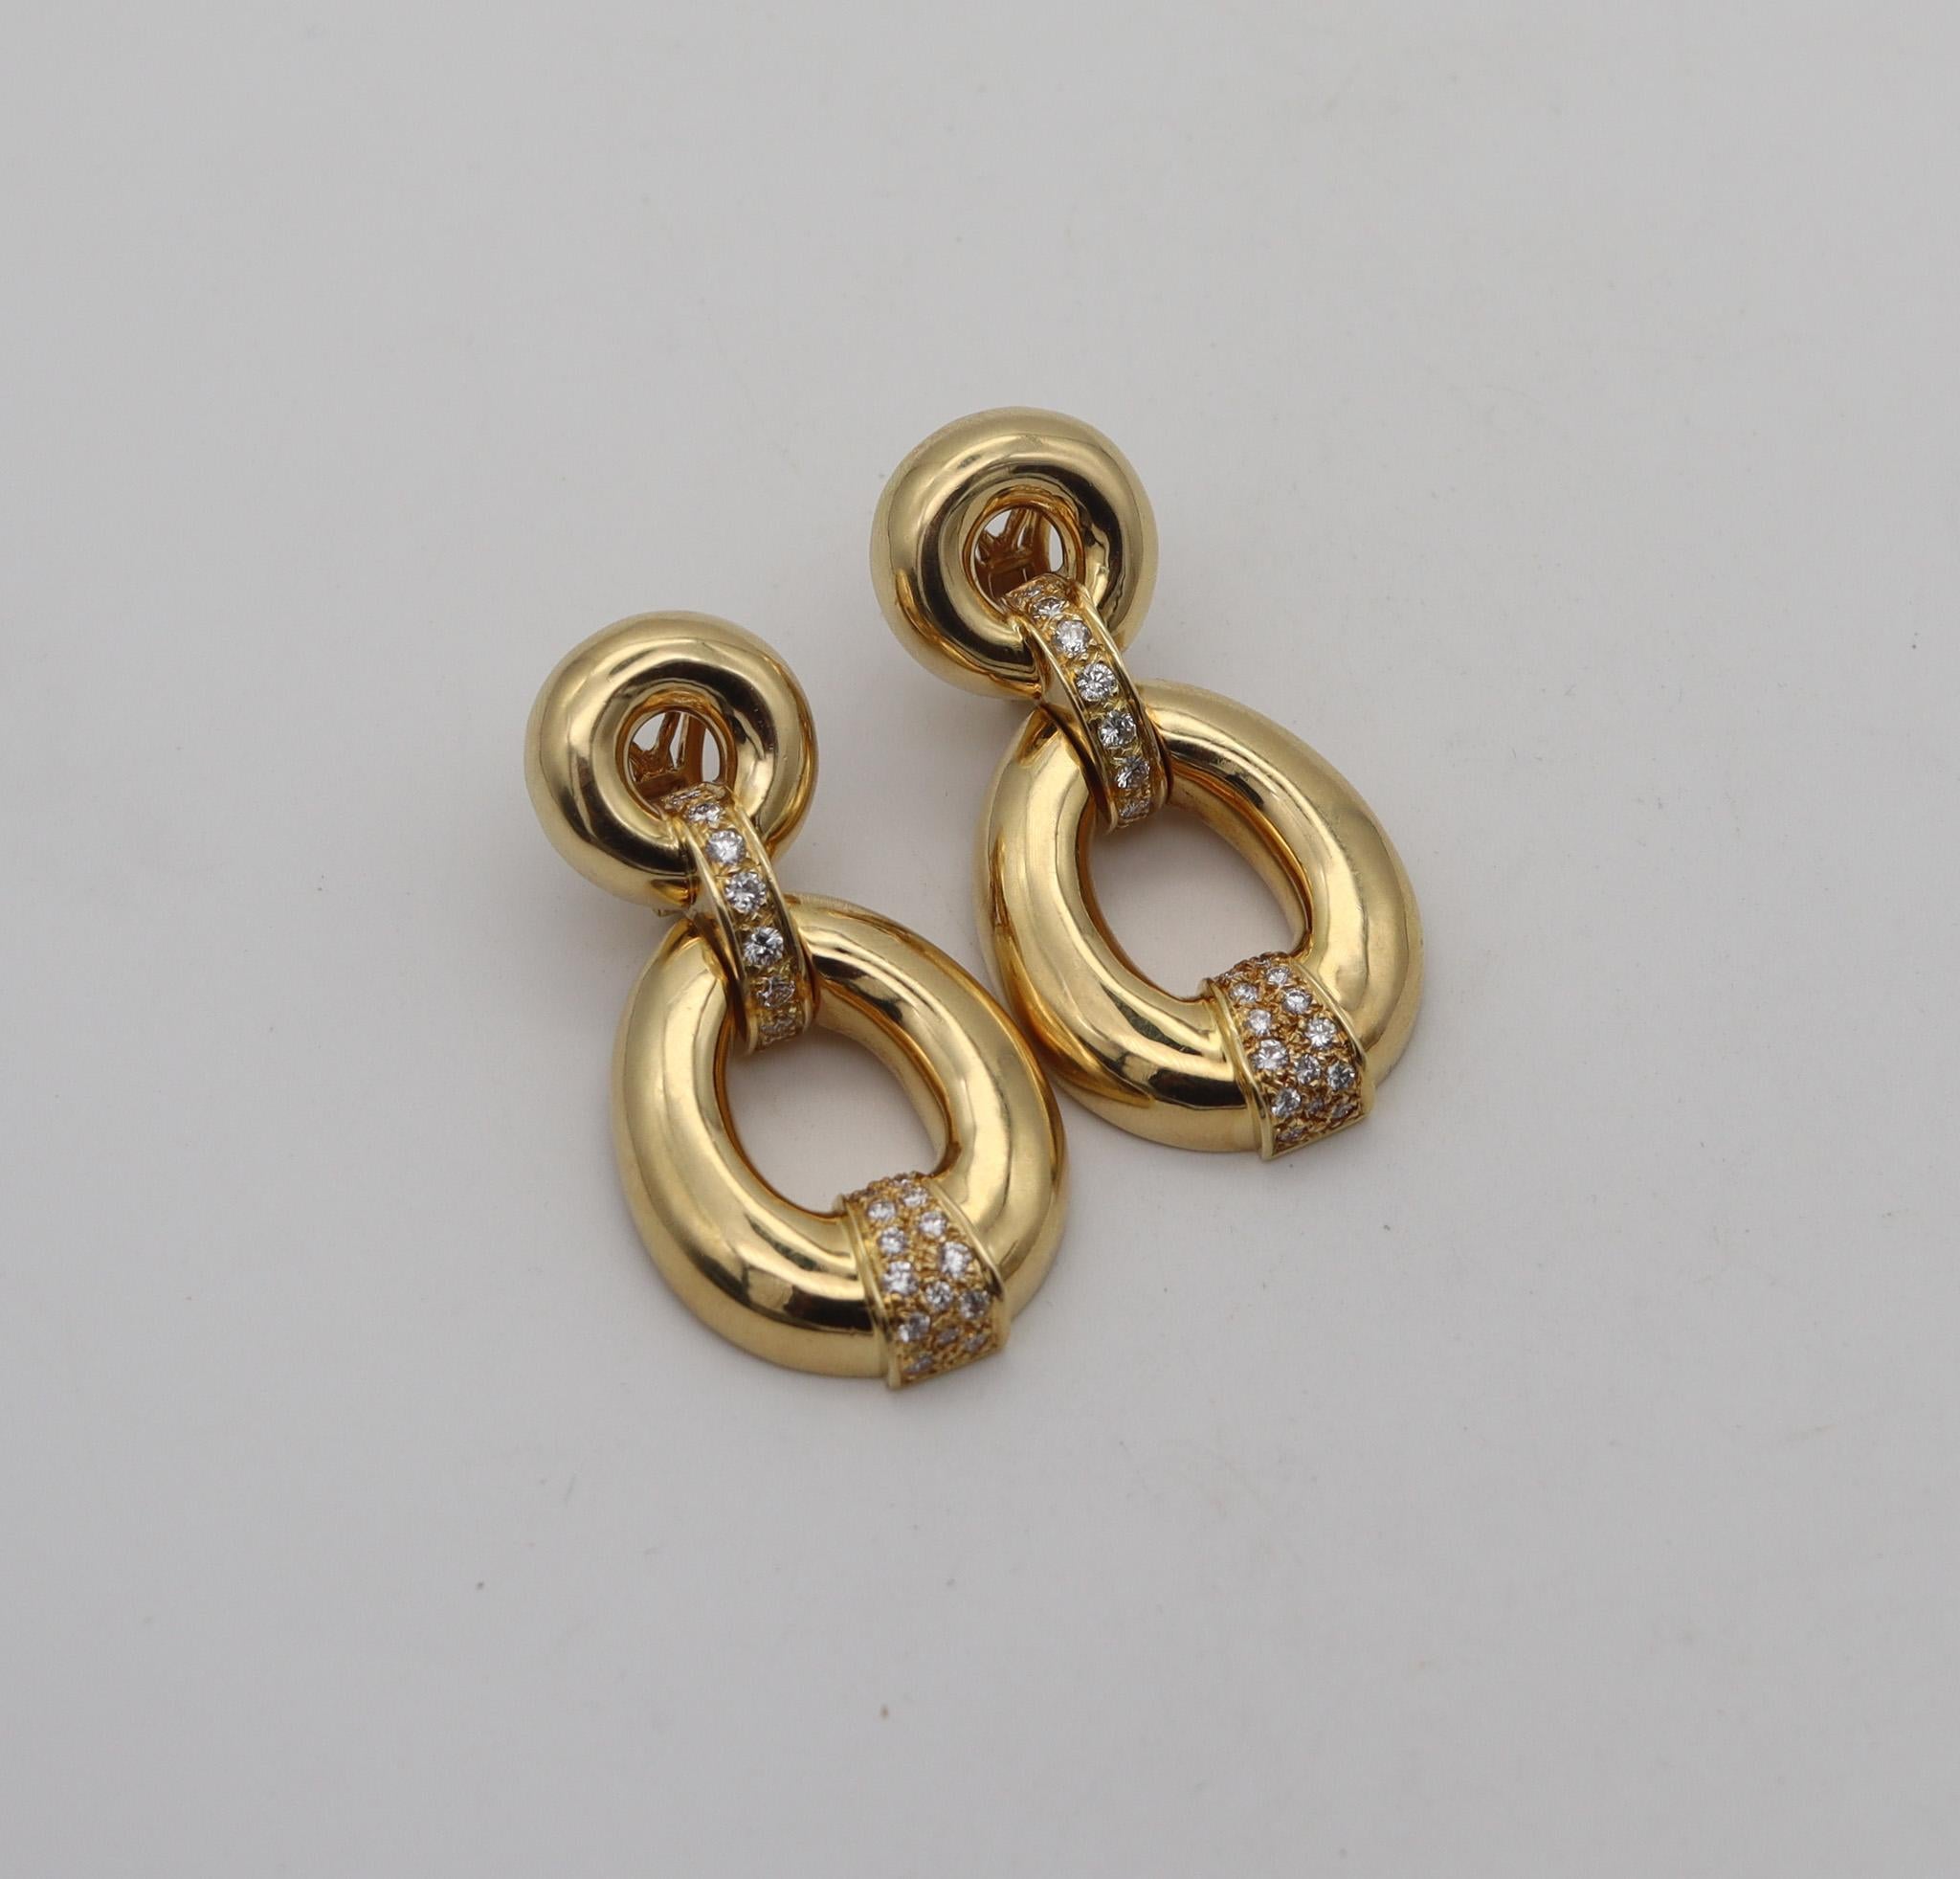 Modern Fred Paris Door Knockers Earrings In 18Kt Yellow Gold With 2.40 Ctw VS Diamonds For Sale